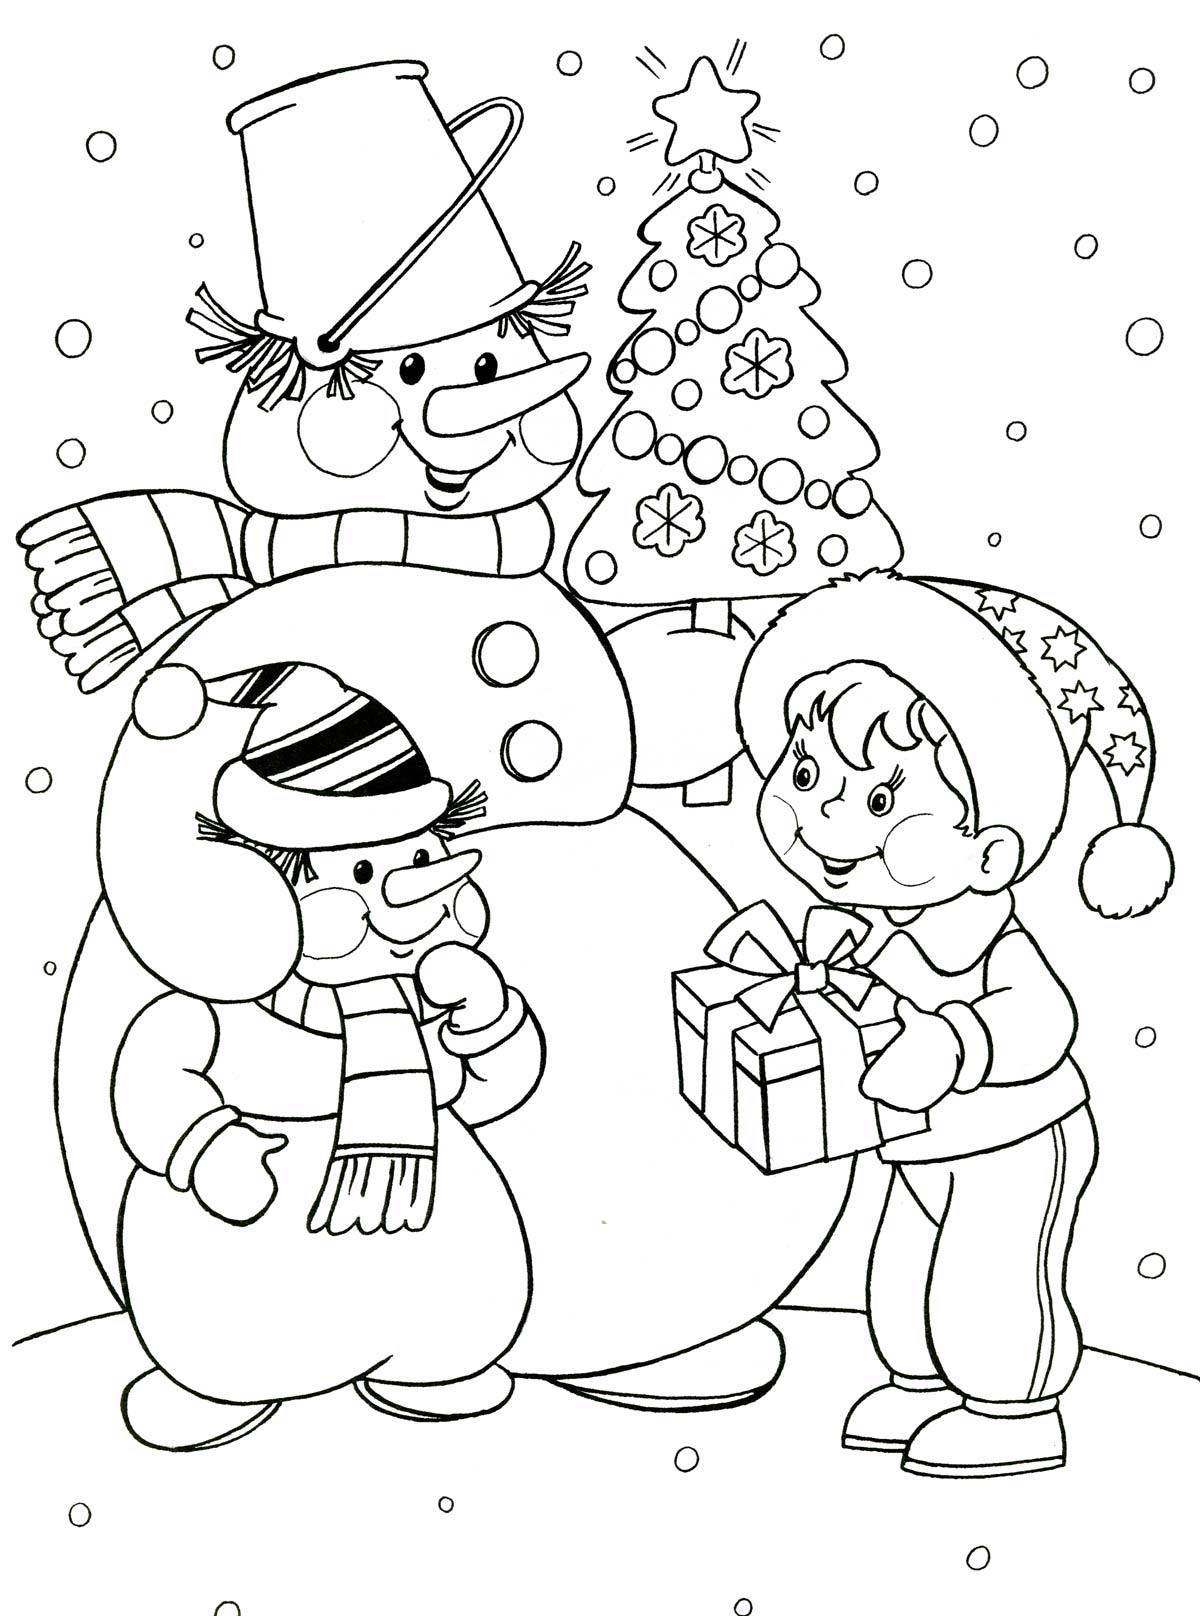 Adorable Christmas coloring pictures for kids